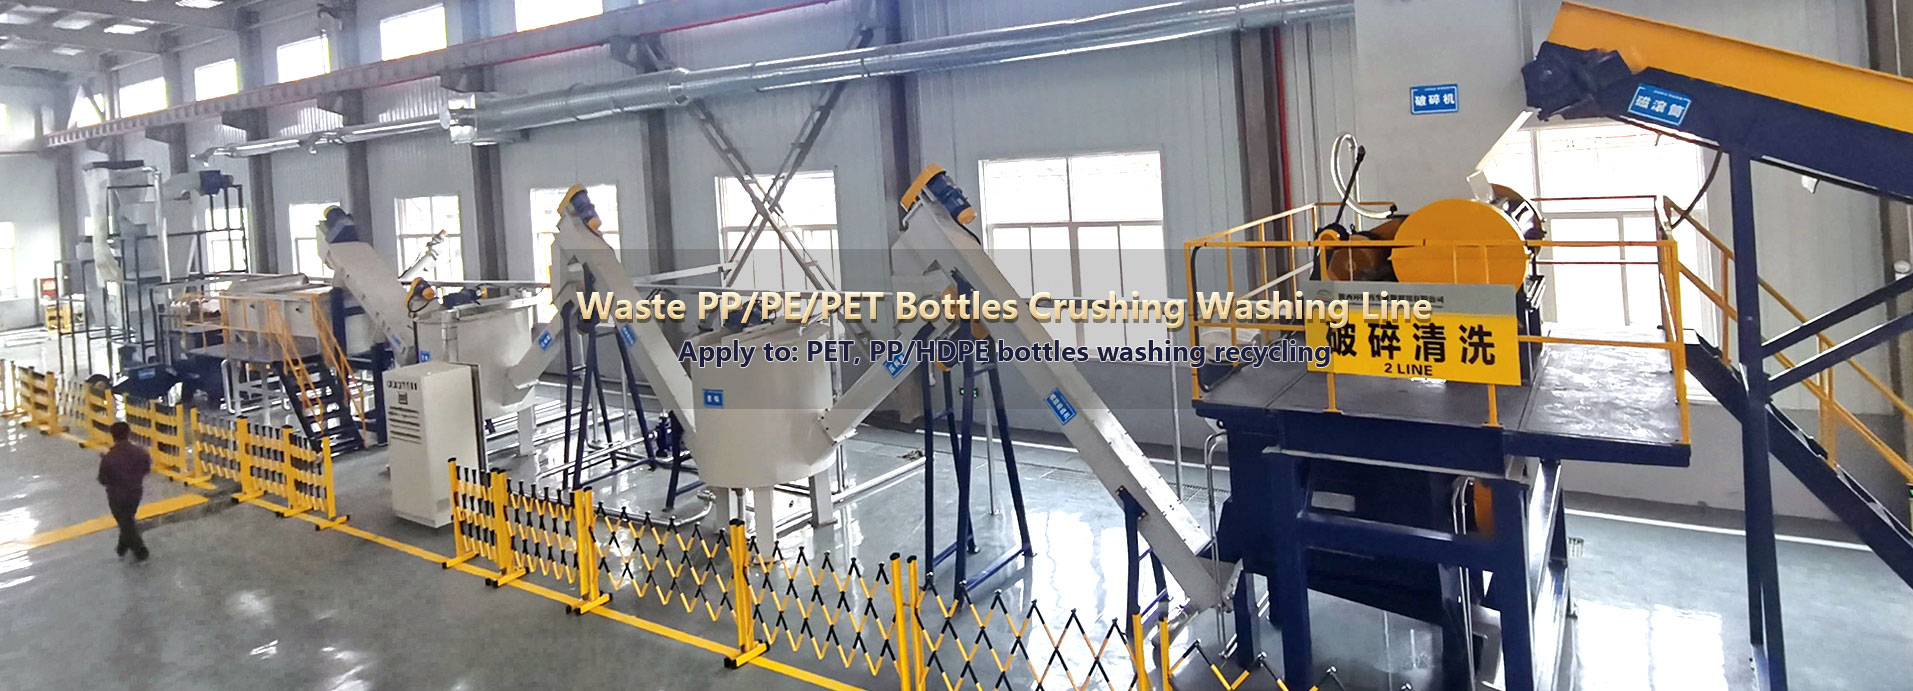 Construction Waste Recycling Line